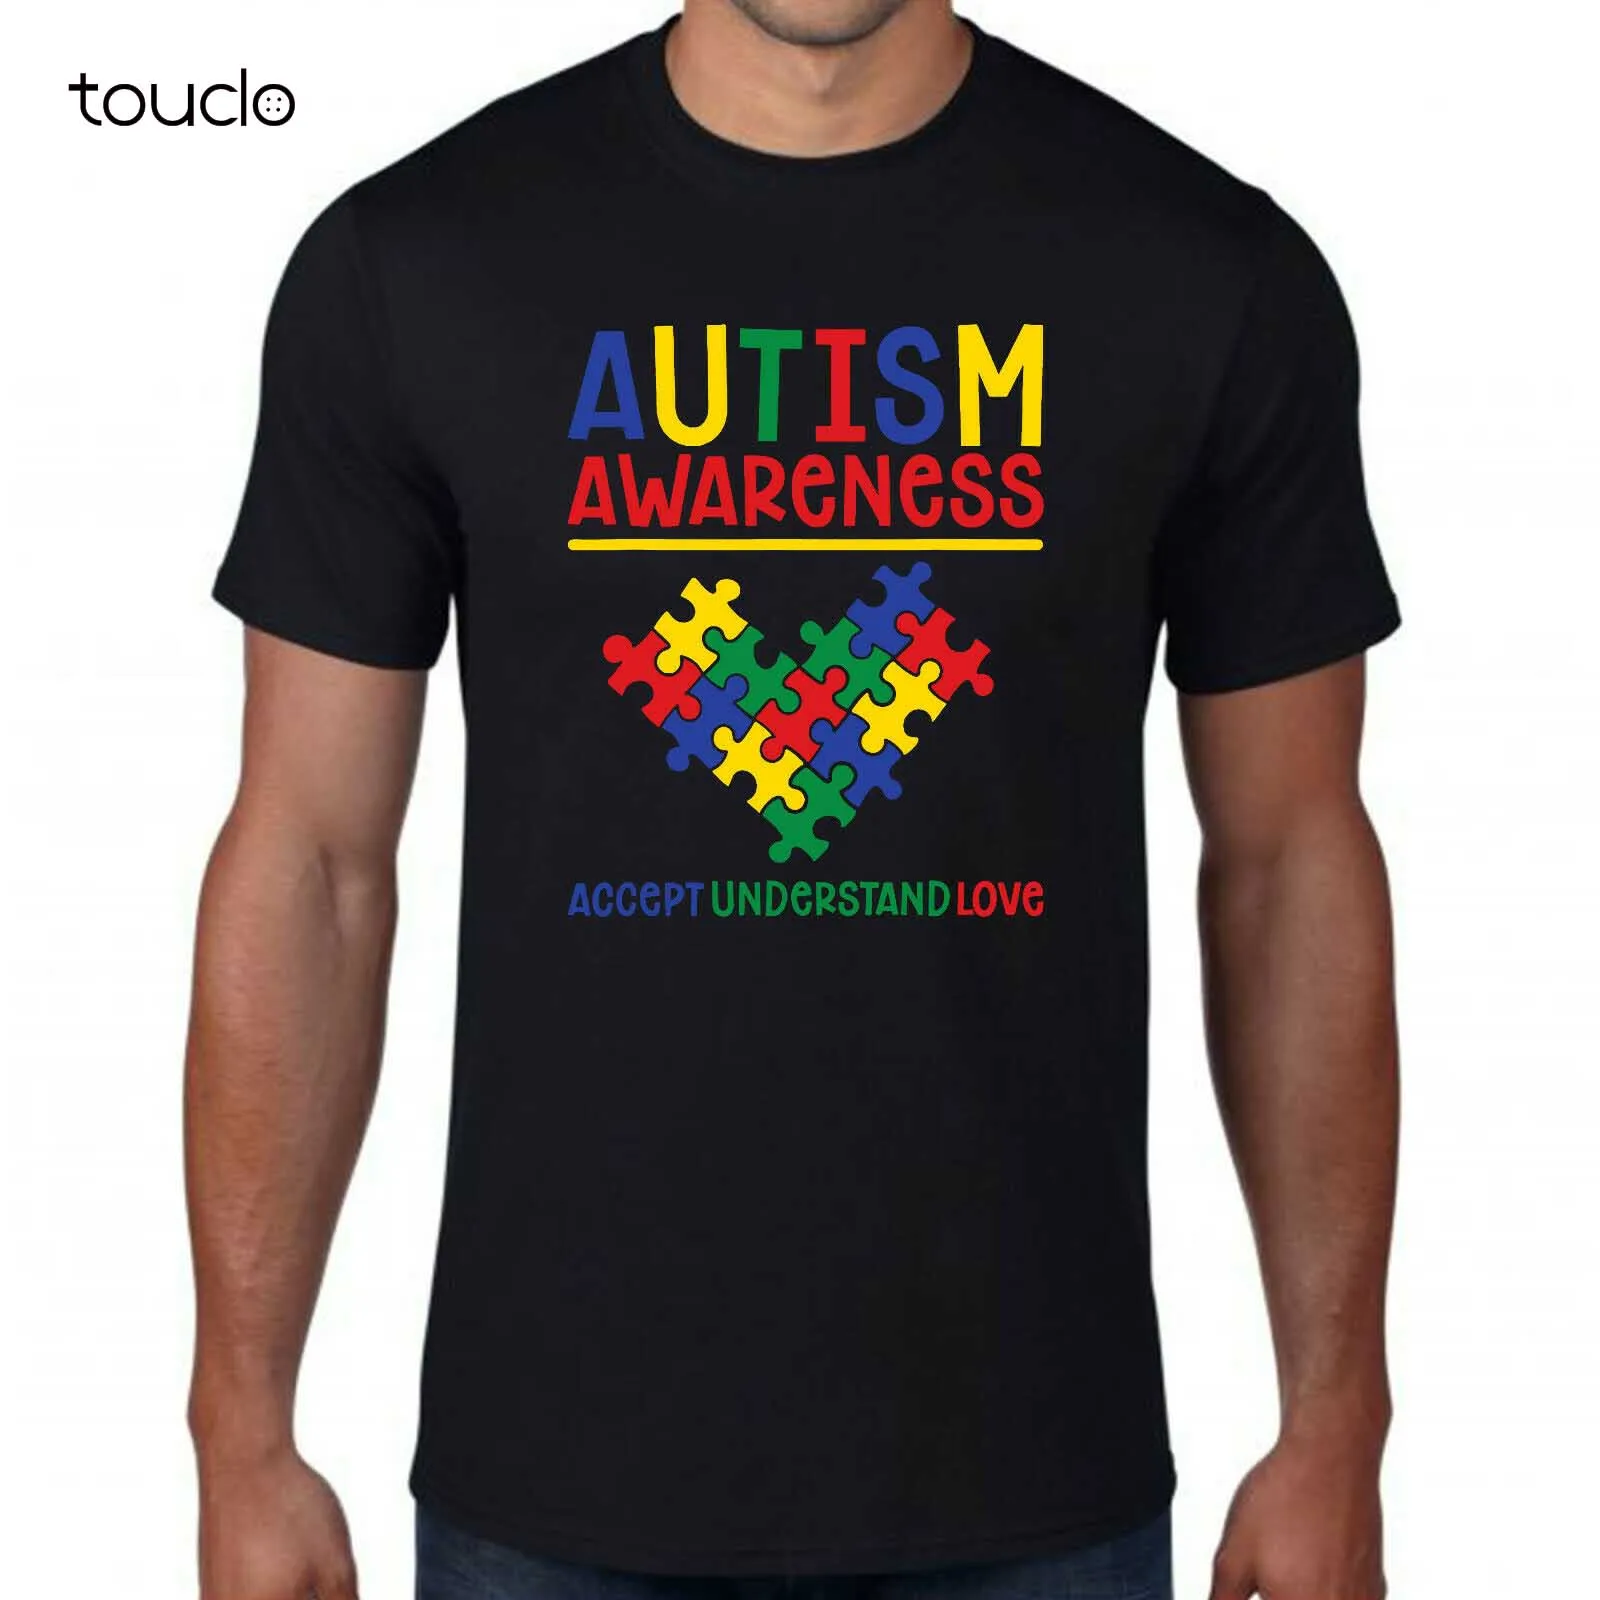 

Autism Awareness Day T-Shirt accept Understand Love Disability Puzzle Heart Gift Custom Aldult Teen Unisex Digital Printing